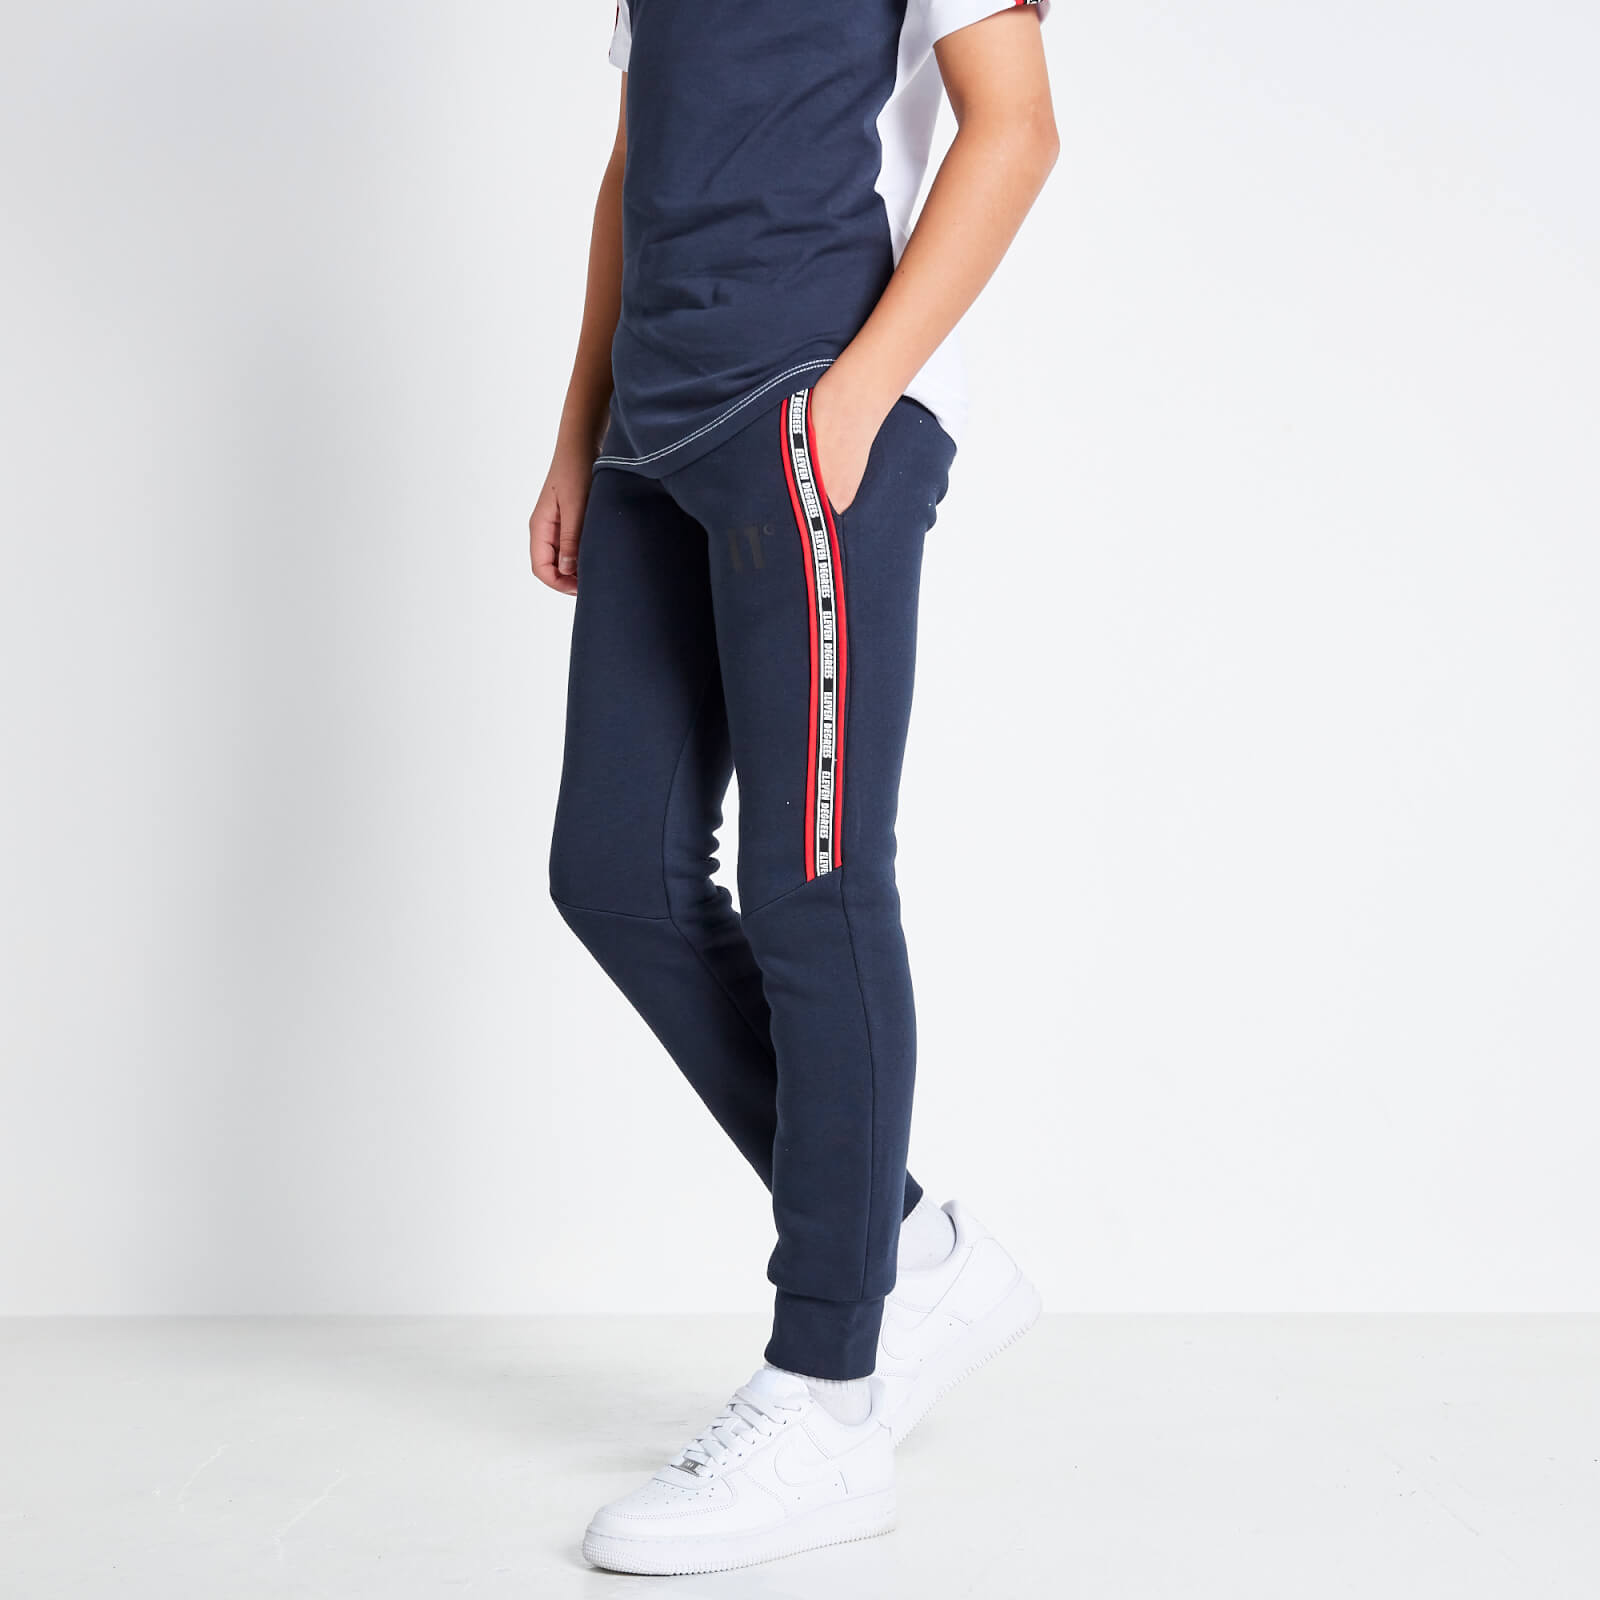 taped joggers - navy - 8-10 years